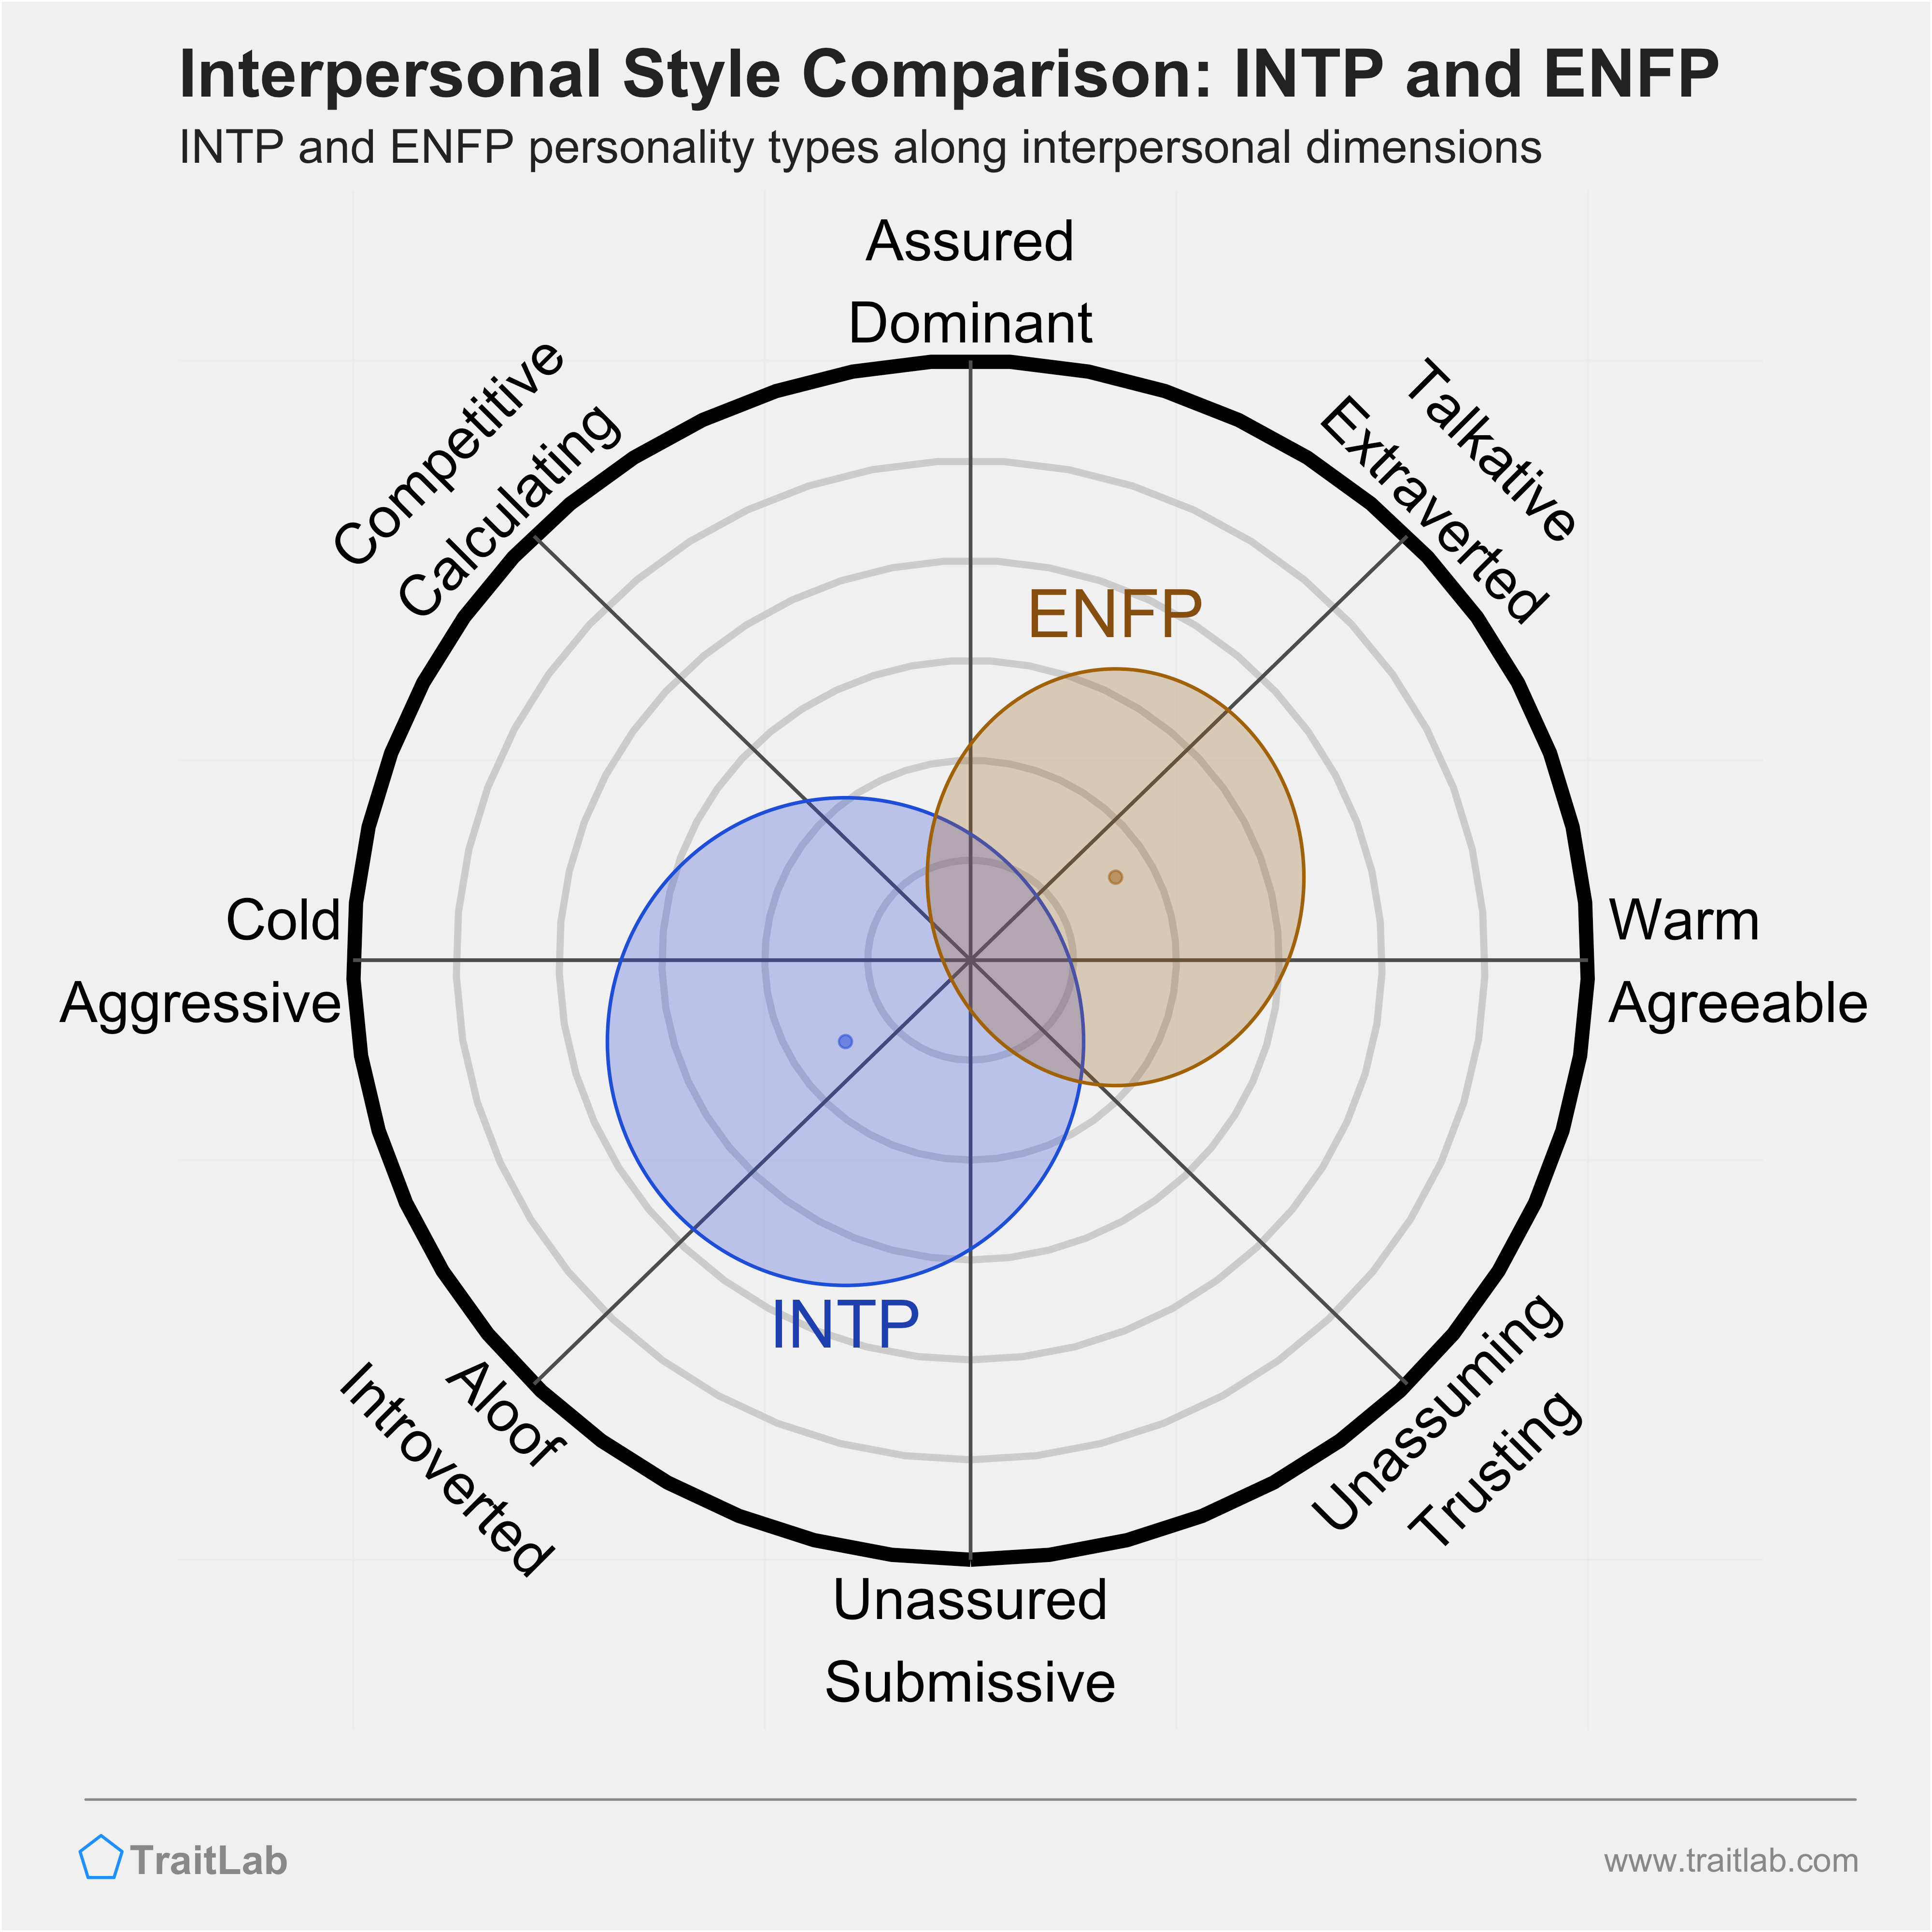 INTP and ENFP comparison across interpersonal dimensions